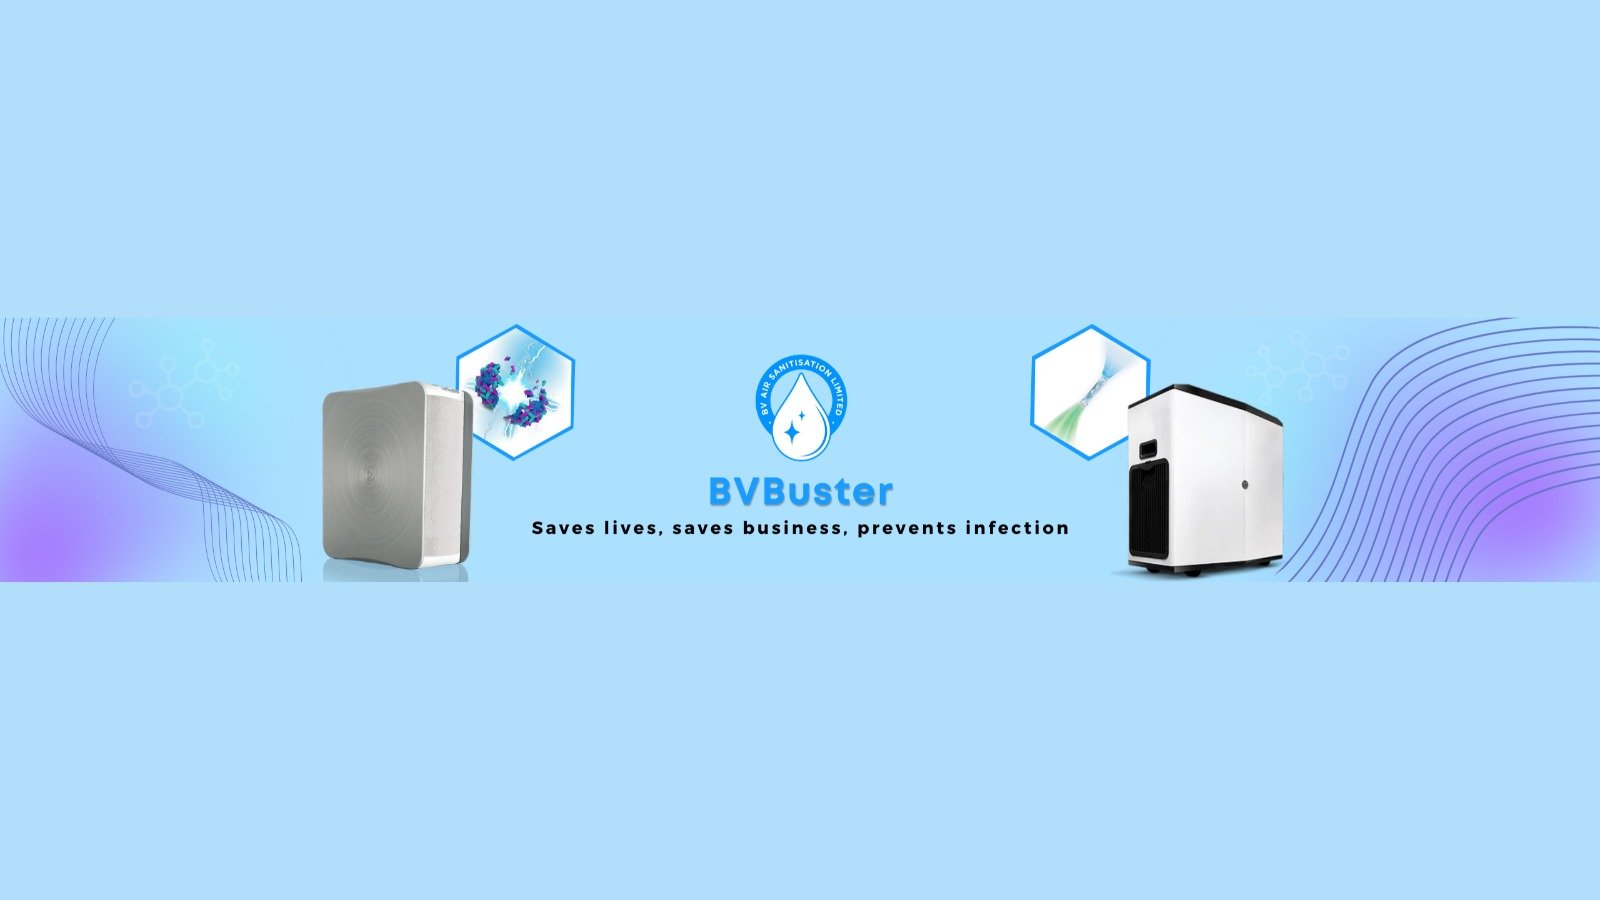 BV Buster Introducing Game-Changing Air Disinfection and Sanitization Systems to Save Lives, Save Businesses and Prevent Infection.